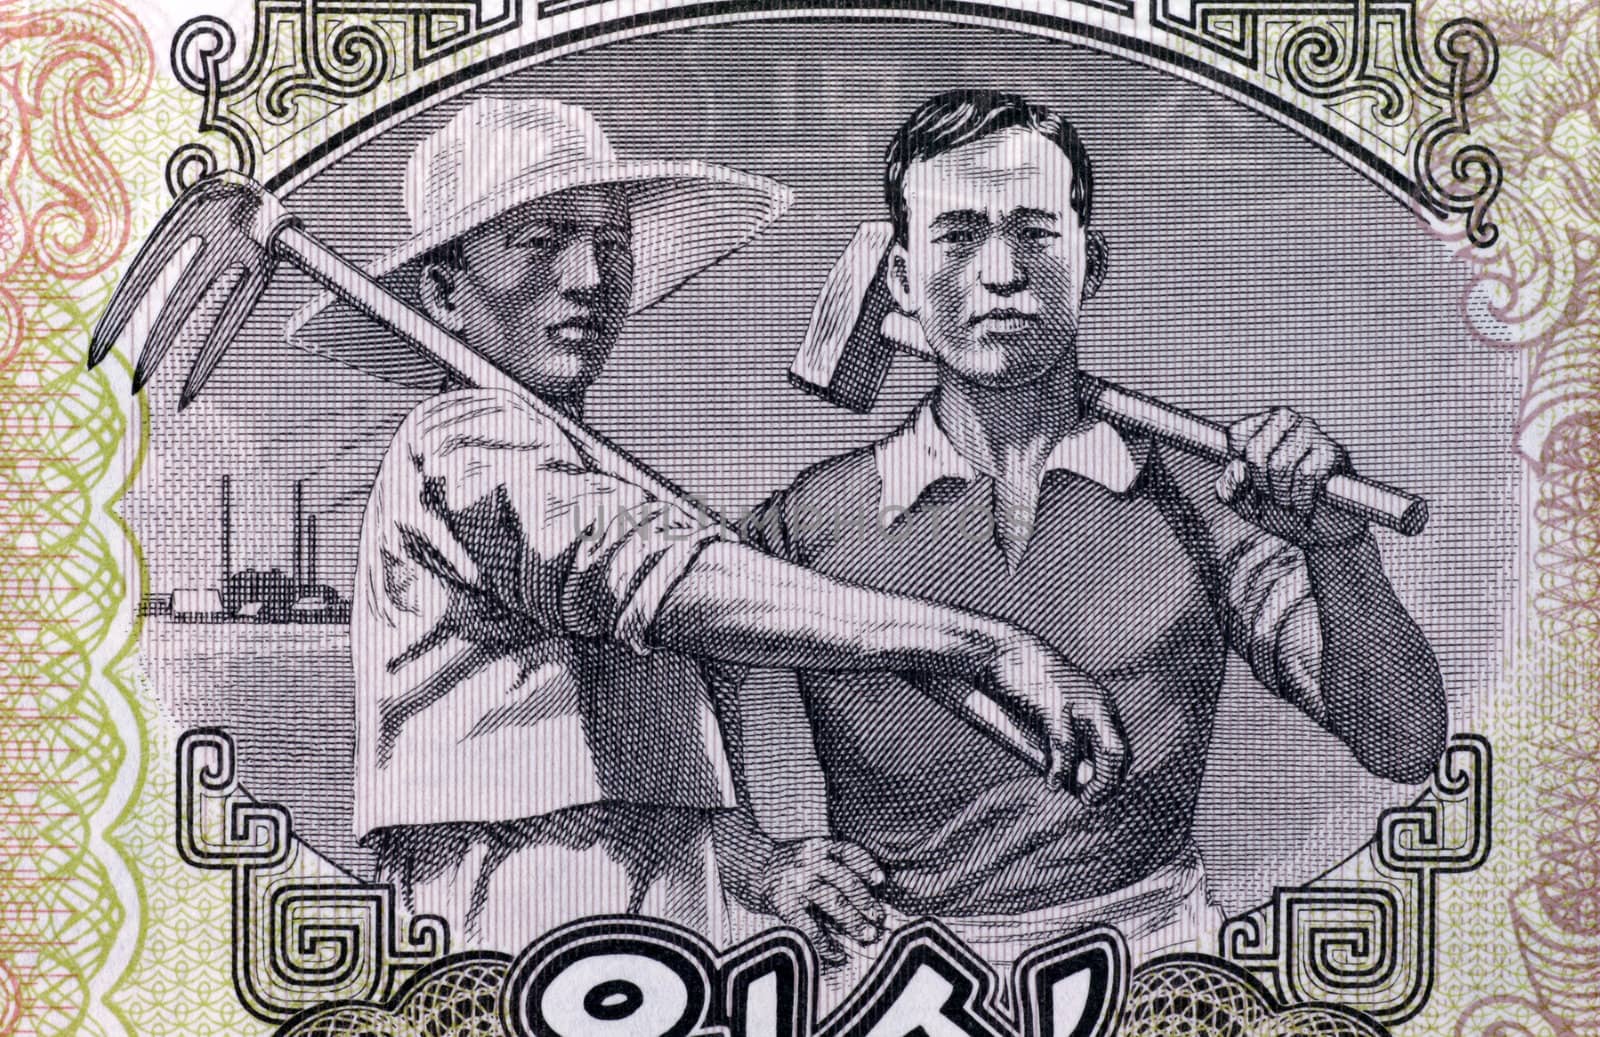 Worker and Farmer on 10 Won 1947 Banknote from North Korea